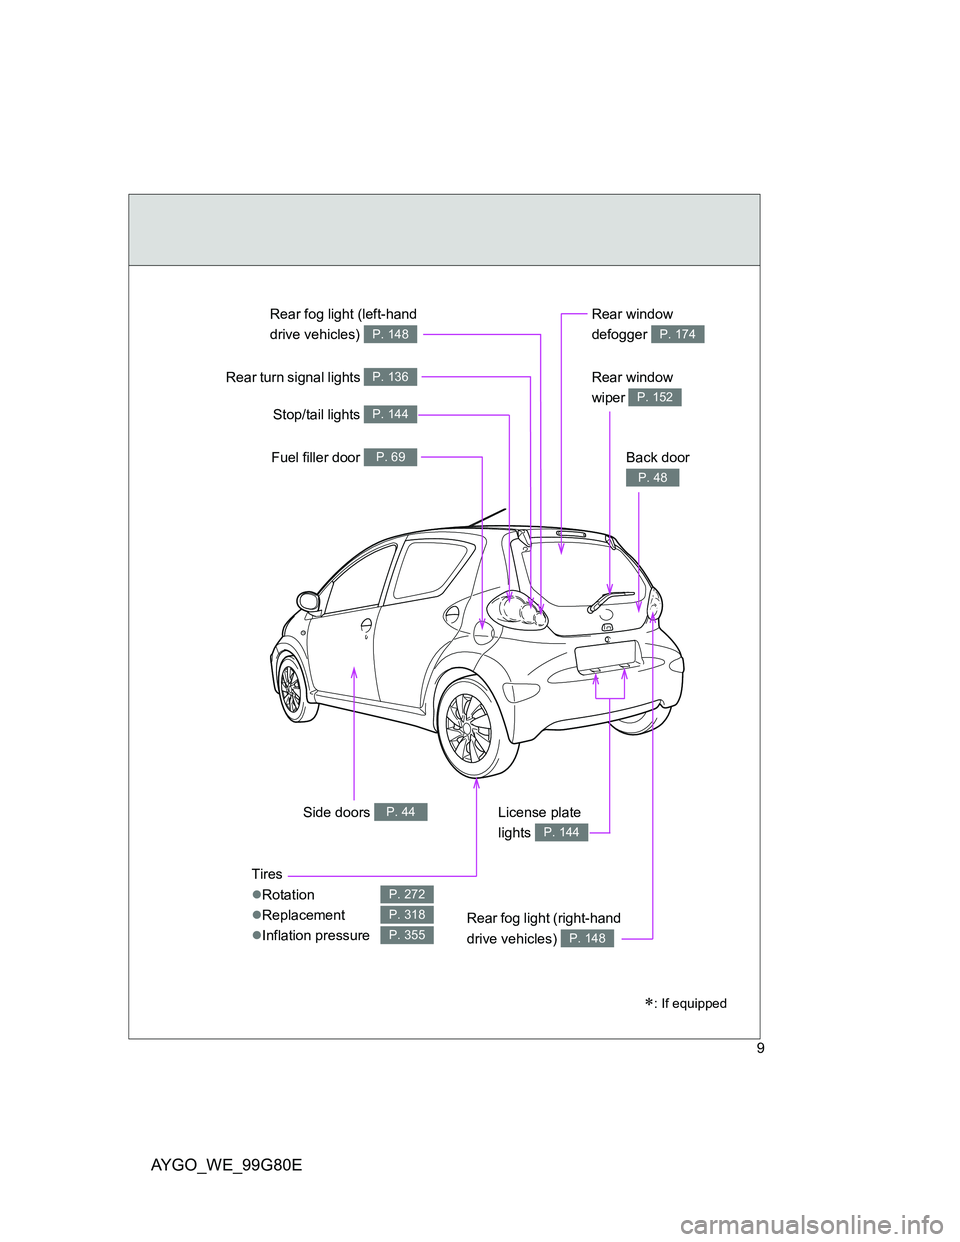 TOYOTA AYGO 2013  Owners Manual (in English) AYGO_WE_99G80E
9
Rear window 
wiper 
P. 152
Tires
Rotation
Replacement
Inflation pressure
P. 272
P. 318
P. 355
Side doors P. 44
Rear window 
defogger 
P. 174
Fuel filler door P. 69
Stop/tail 